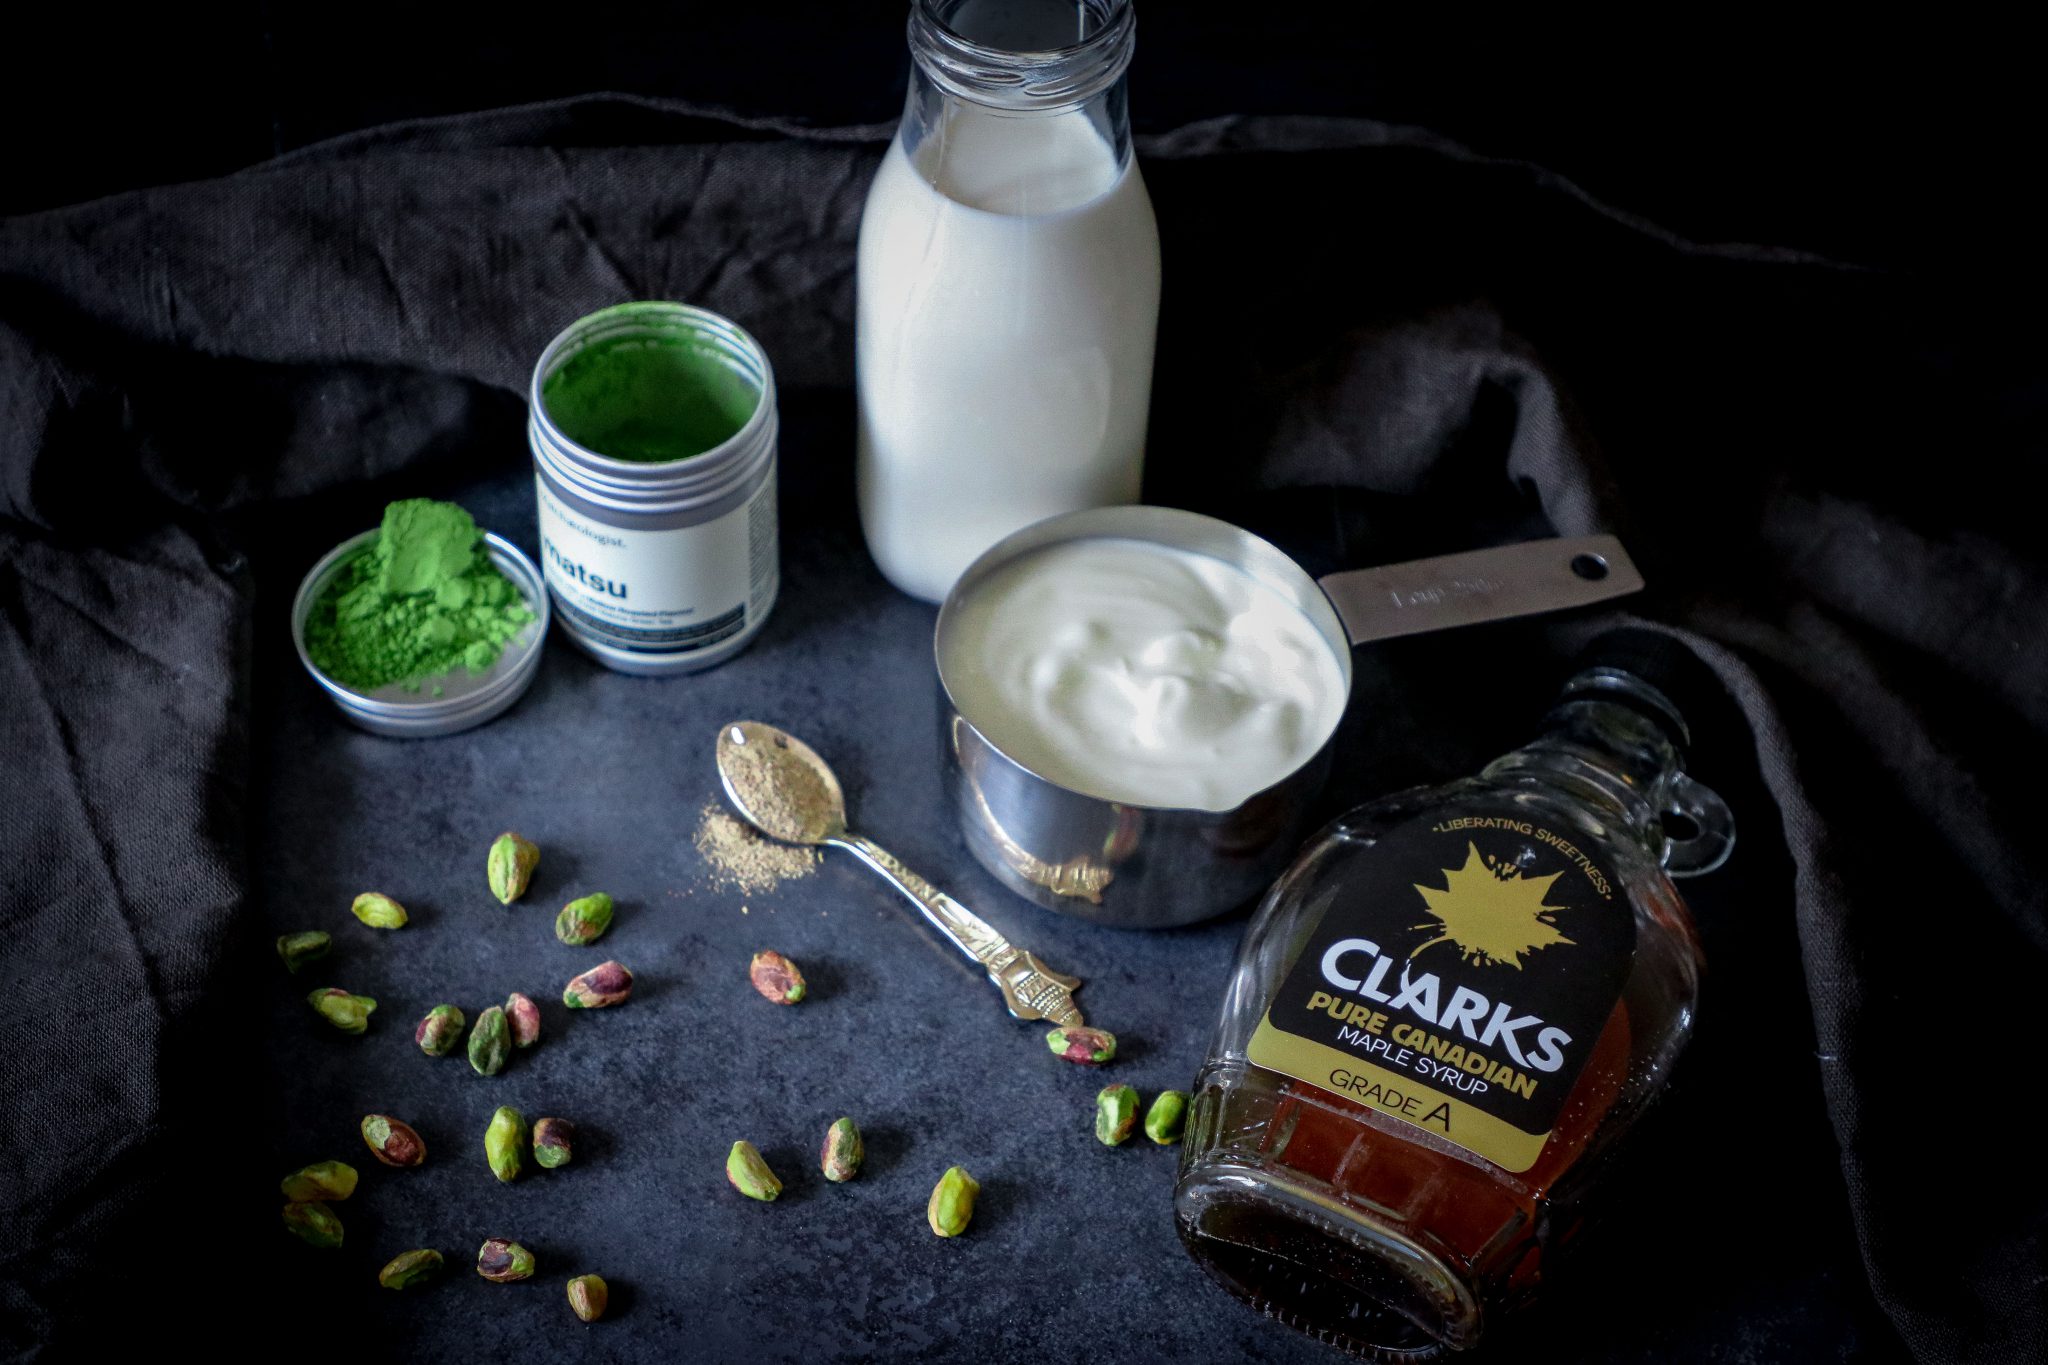 Summers are knocking- try this refreshing and healthy mix of yoghurt, milk, pistachios and matcha.